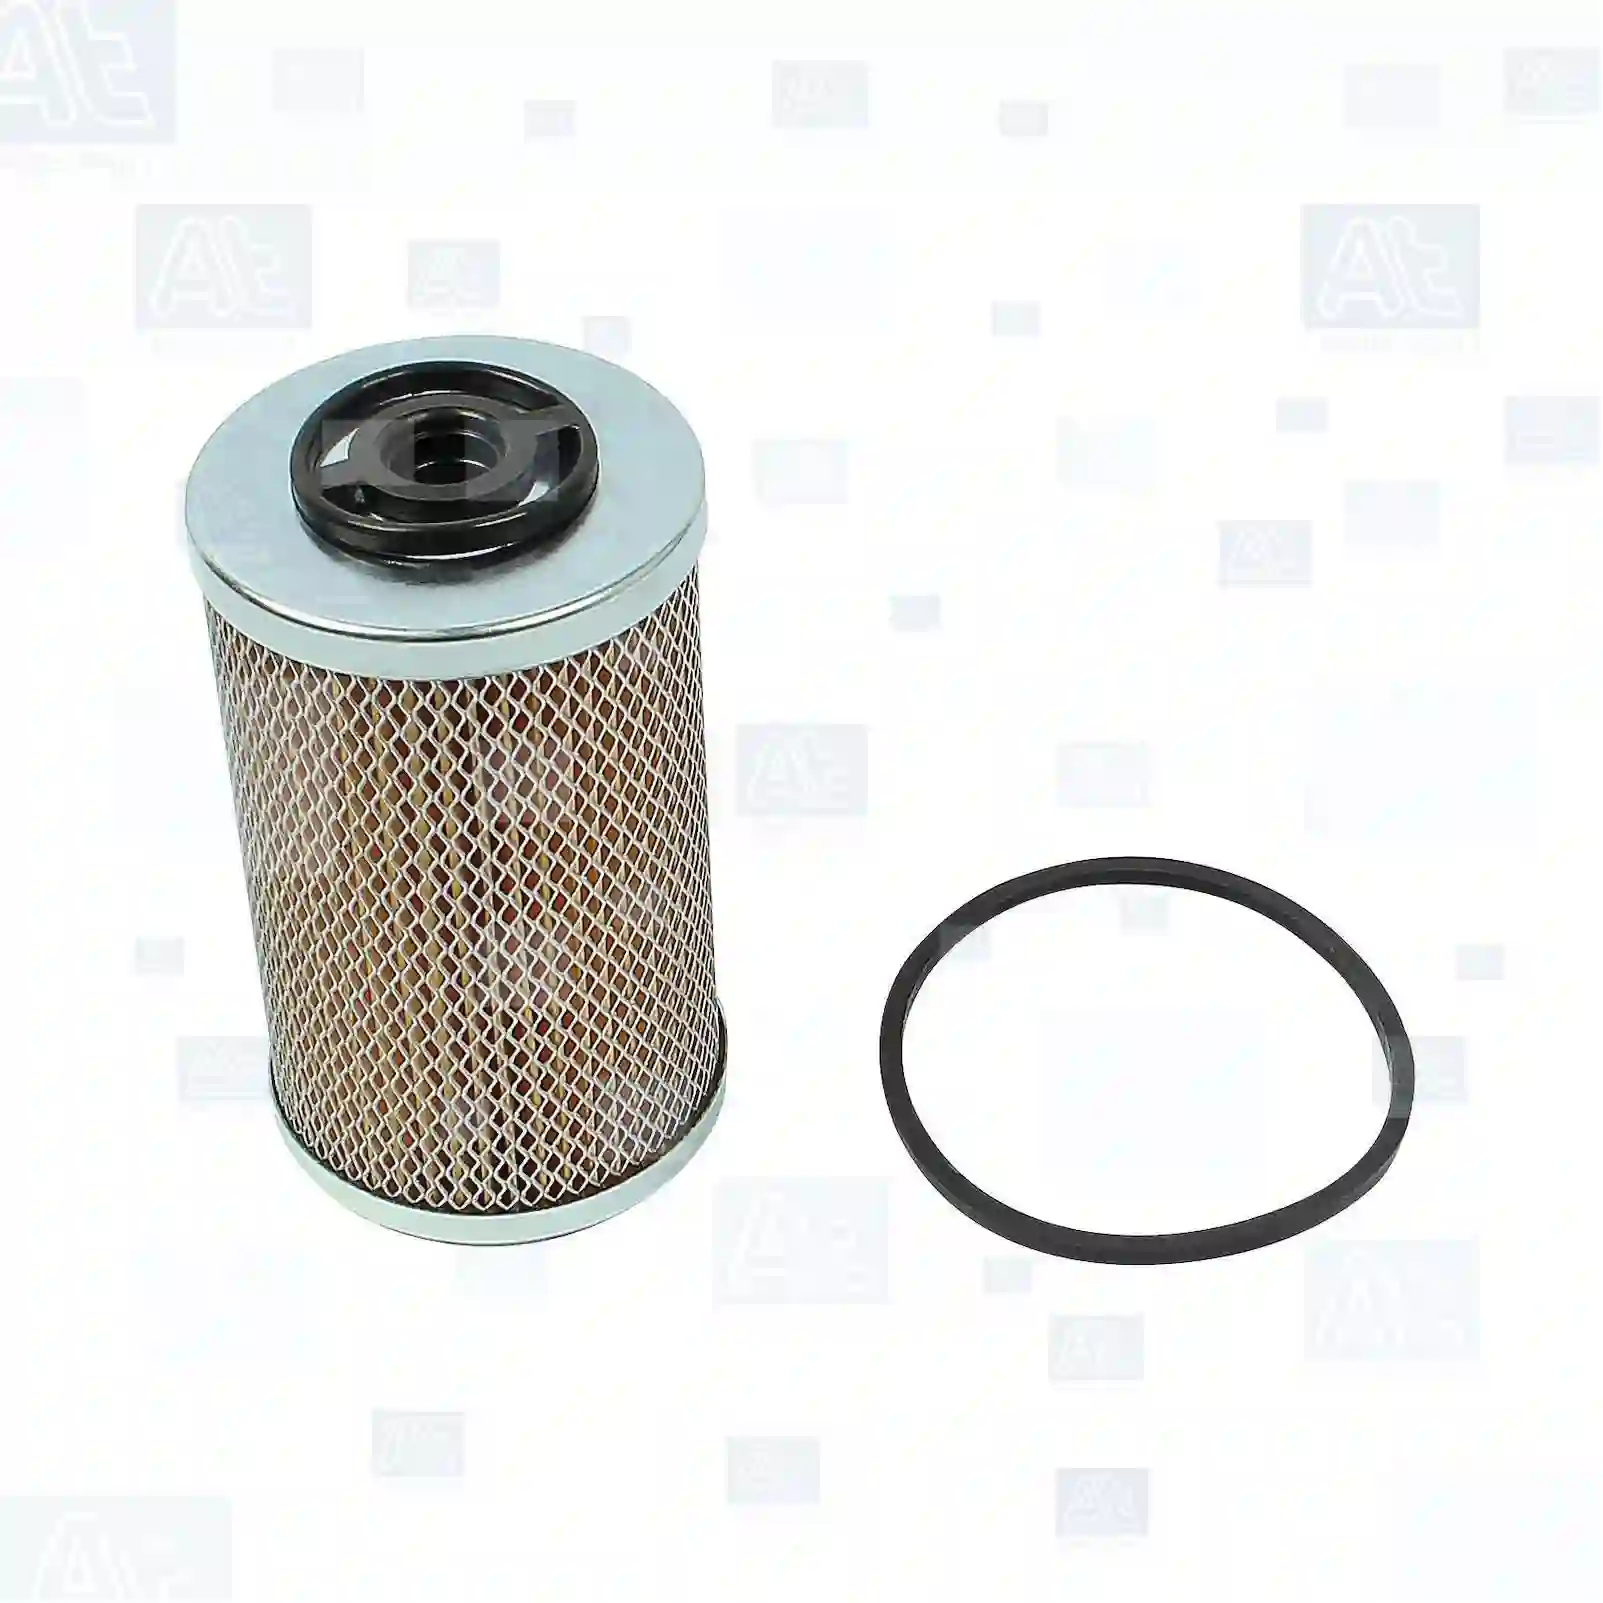 Fuel Filter, cpl. Fuel filter insert, at no: 77723262 ,  oem no:8034700, 52339U, 41028, 41052, 3056982, 3056982R1, 712628, 712628R91, 712629R91, 715711R91, 715712, 715712R91, 716847, 716847R91, 717858R91, 3I-1122, 3I-1587, 8H-4120, 7965458, 7984299, 322405, 3444777215, 4700192, 4770815, 4771015, 4773815, 4774215, 4774715, 4775415, 4775715, 4776415, 4776815, 4776915, 921505, 921905, 9215055, 922305, 922705, 190605, 190607, 0000991050, 0000991051, 0003658350, 65125035003, 0548257, 1500446, 234215, 548247, 548257, 9234125, 9234215, ABU8556, 760590, 76059000, 963304, 96330400, 01160217, 12153152, 605411400002, 605411400501, 605411420002, 8319000104, 4010276340, 2001301, F015200060180, 00178460, 00572879, 00582041, 01160217, 01824101, 01909108, 42522716, 42522761, 8319000104, 1498018, 178459, 17859, 5001783, 5001873, 5002863, 5003946, DNP550060, 7965458, 7984299, 25055364, 7965458, 7984299, 0009839009, 00099839009, 13024119, 130924116, 130924119, 153187002, 2868365M1, 860153187002, 0000226751, 019465, 0226751, 3056982, 3056982R1, 712628, 712628R91, 712629R91, 715711R91, 715712, 715712R91, 716847, 716847R91, 717858R91, 01160217, 42522761, L19927, RE508954, 40700147, 73153, 01160217, 01161735, 01161755, 01170301, 8319000104, 1160217, F545, 243195304, 5602112, 7002305, 2762175014, 276217514, 1082448R92, 81000000244, 81125030001, 81125030014, 81125030015, 81125030016, 81125030020, 81125030036, 81125030040, 81125030041, 81125030051, 1225406, 153187002, 1603209M1, 1630209, 1630209M1, 2001301, 2868365M1, 33002, 620601, 630257, 631227, 655815, 656135, 0000322405, 0000922305, 0000922405, 0004700922, 0004755401, 0004770815, 0004771015, 0004774514, 0004774615, 0004774715, 0004775315, 0004776415, 0004776514, 0004776580, 0004776915, 0004778901, 0010902041, 0153187002, 0153187003, 3440927005, 3440927305, 5984520800, 8319000104, 9451080077, 112482732988, 605411400002, 605411400501, 605411420002, 1225406, 33002, 190604, 190605, 190607, 0000870159, 0000870160, 0008540860, 0008548060, 0008548759, 0008701760, 0008704567, 0008704657, 0048100250, 0048100251, 0087046557, 0807176000, 0854670900, 0870176000, 0870465700, 0875492156, 0904200091, 0904200093, 0904200176, 0904200177, 2085467570, 2085480470, 2087046570, 5000241677, 6005019597, 8548759000, 8701760000, CBO1000, 235301, 2D952446, 00314130, 243195304, 4005010, 8319000104, 1407080132, 1855504, 1885504, 380955164, 407080132, 40708132391, 4070800132, 61100080079, 4010276340, 4011080430, FS16040, 4531002, 233574, 233898, 2338986, 233988, 414383, 4773815, 4774215, 6605860, 66058603, 7133574, 7233574, 76653, 817695, 8176950, 93009905, ZG10178-0008 At Spare Part | Engine, Accelerator Pedal, Camshaft, Connecting Rod, Crankcase, Crankshaft, Cylinder Head, Engine Suspension Mountings, Exhaust Manifold, Exhaust Gas Recirculation, Filter Kits, Flywheel Housing, General Overhaul Kits, Engine, Intake Manifold, Oil Cleaner, Oil Cooler, Oil Filter, Oil Pump, Oil Sump, Piston & Liner, Sensor & Switch, Timing Case, Turbocharger, Cooling System, Belt Tensioner, Coolant Filter, Coolant Pipe, Corrosion Prevention Agent, Drive, Expansion Tank, Fan, Intercooler, Monitors & Gauges, Radiator, Thermostat, V-Belt / Timing belt, Water Pump, Fuel System, Electronical Injector Unit, Feed Pump, Fuel Filter, cpl., Fuel Gauge Sender,  Fuel Line, Fuel Pump, Fuel Tank, Injection Line Kit, Injection Pump, Exhaust System, Clutch & Pedal, Gearbox, Propeller Shaft, Axles, Brake System, Hubs & Wheels, Suspension, Leaf Spring, Universal Parts / Accessories, Steering, Electrical System, Cabin